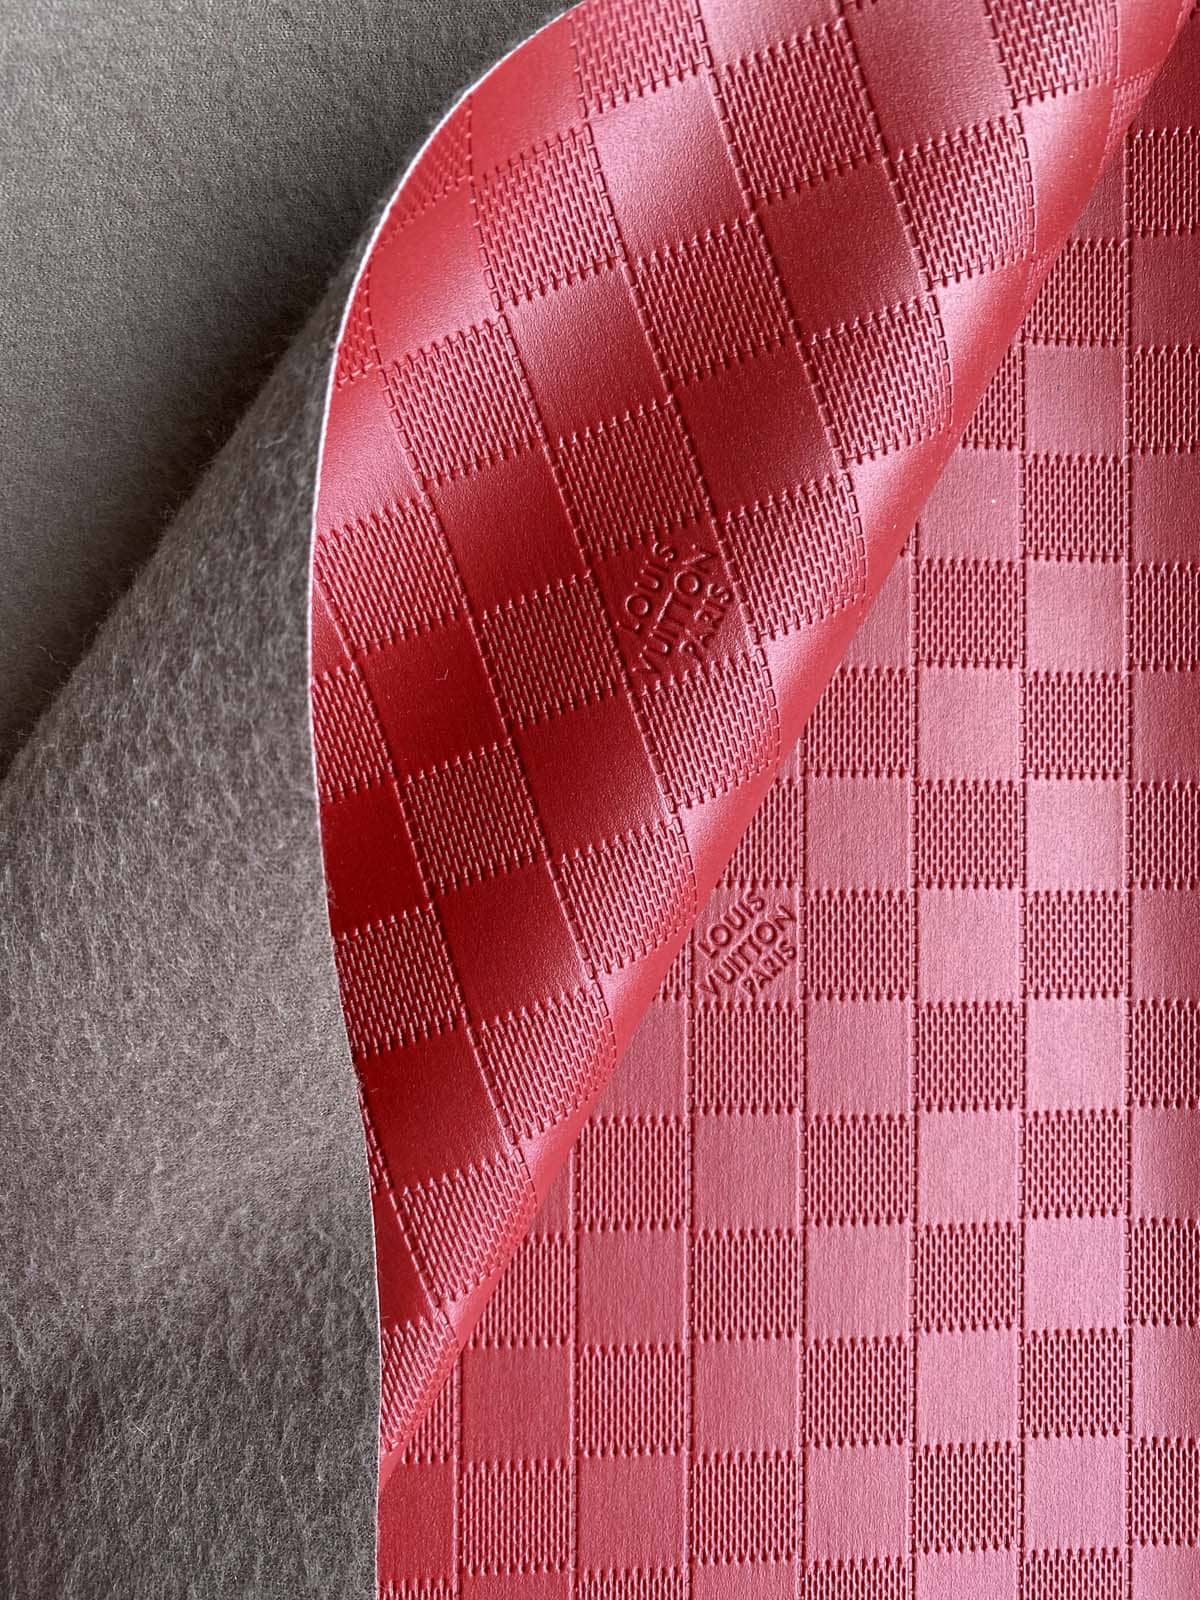 louis vuitton leather fabrics pale red